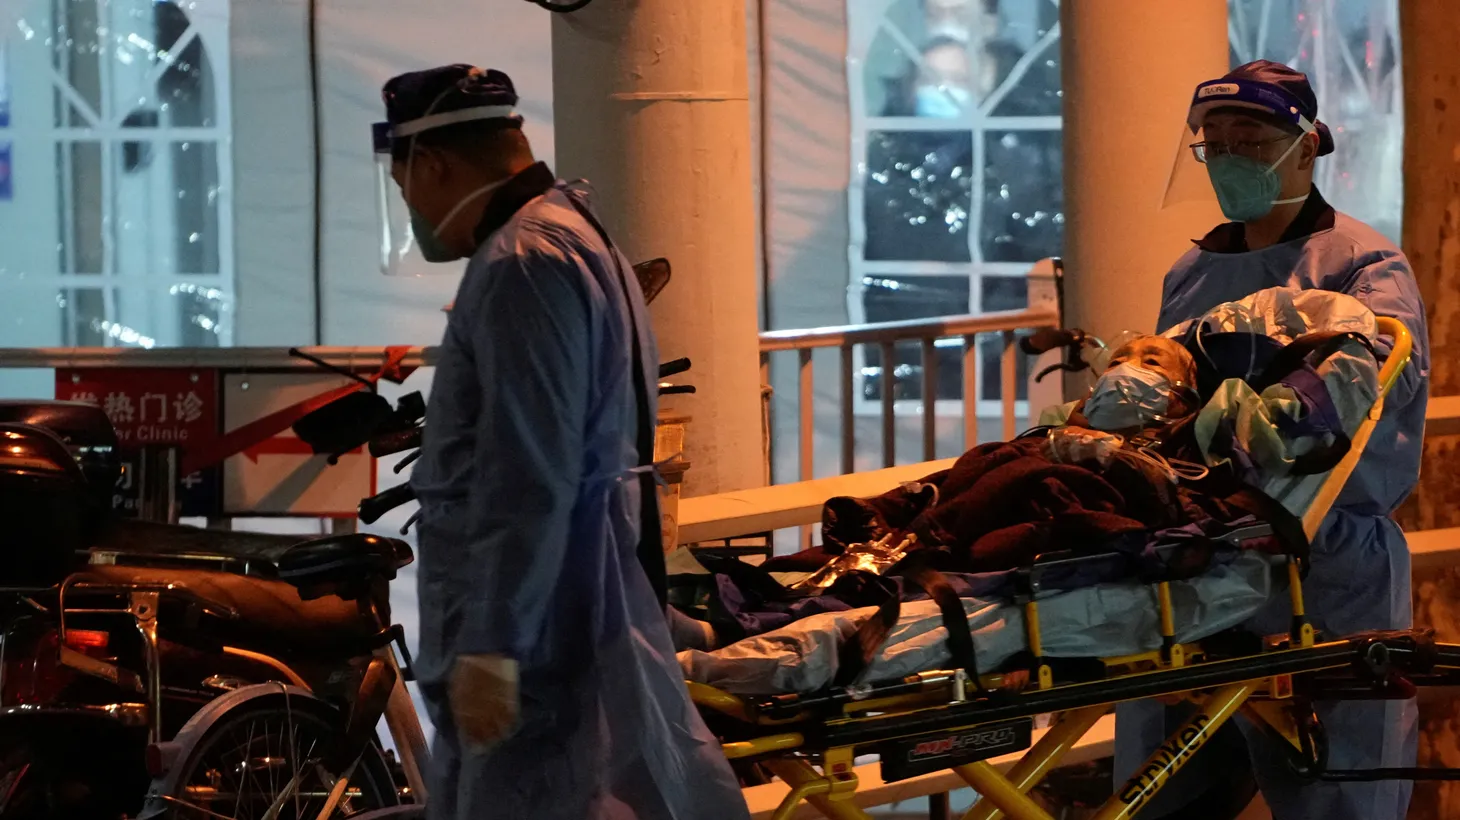 Medical staff members move a patient into a fever clinic at a hospital, as coronavirus disease (COVID-19) outbreaks continue in Shanghai, China, December 19, 2022.